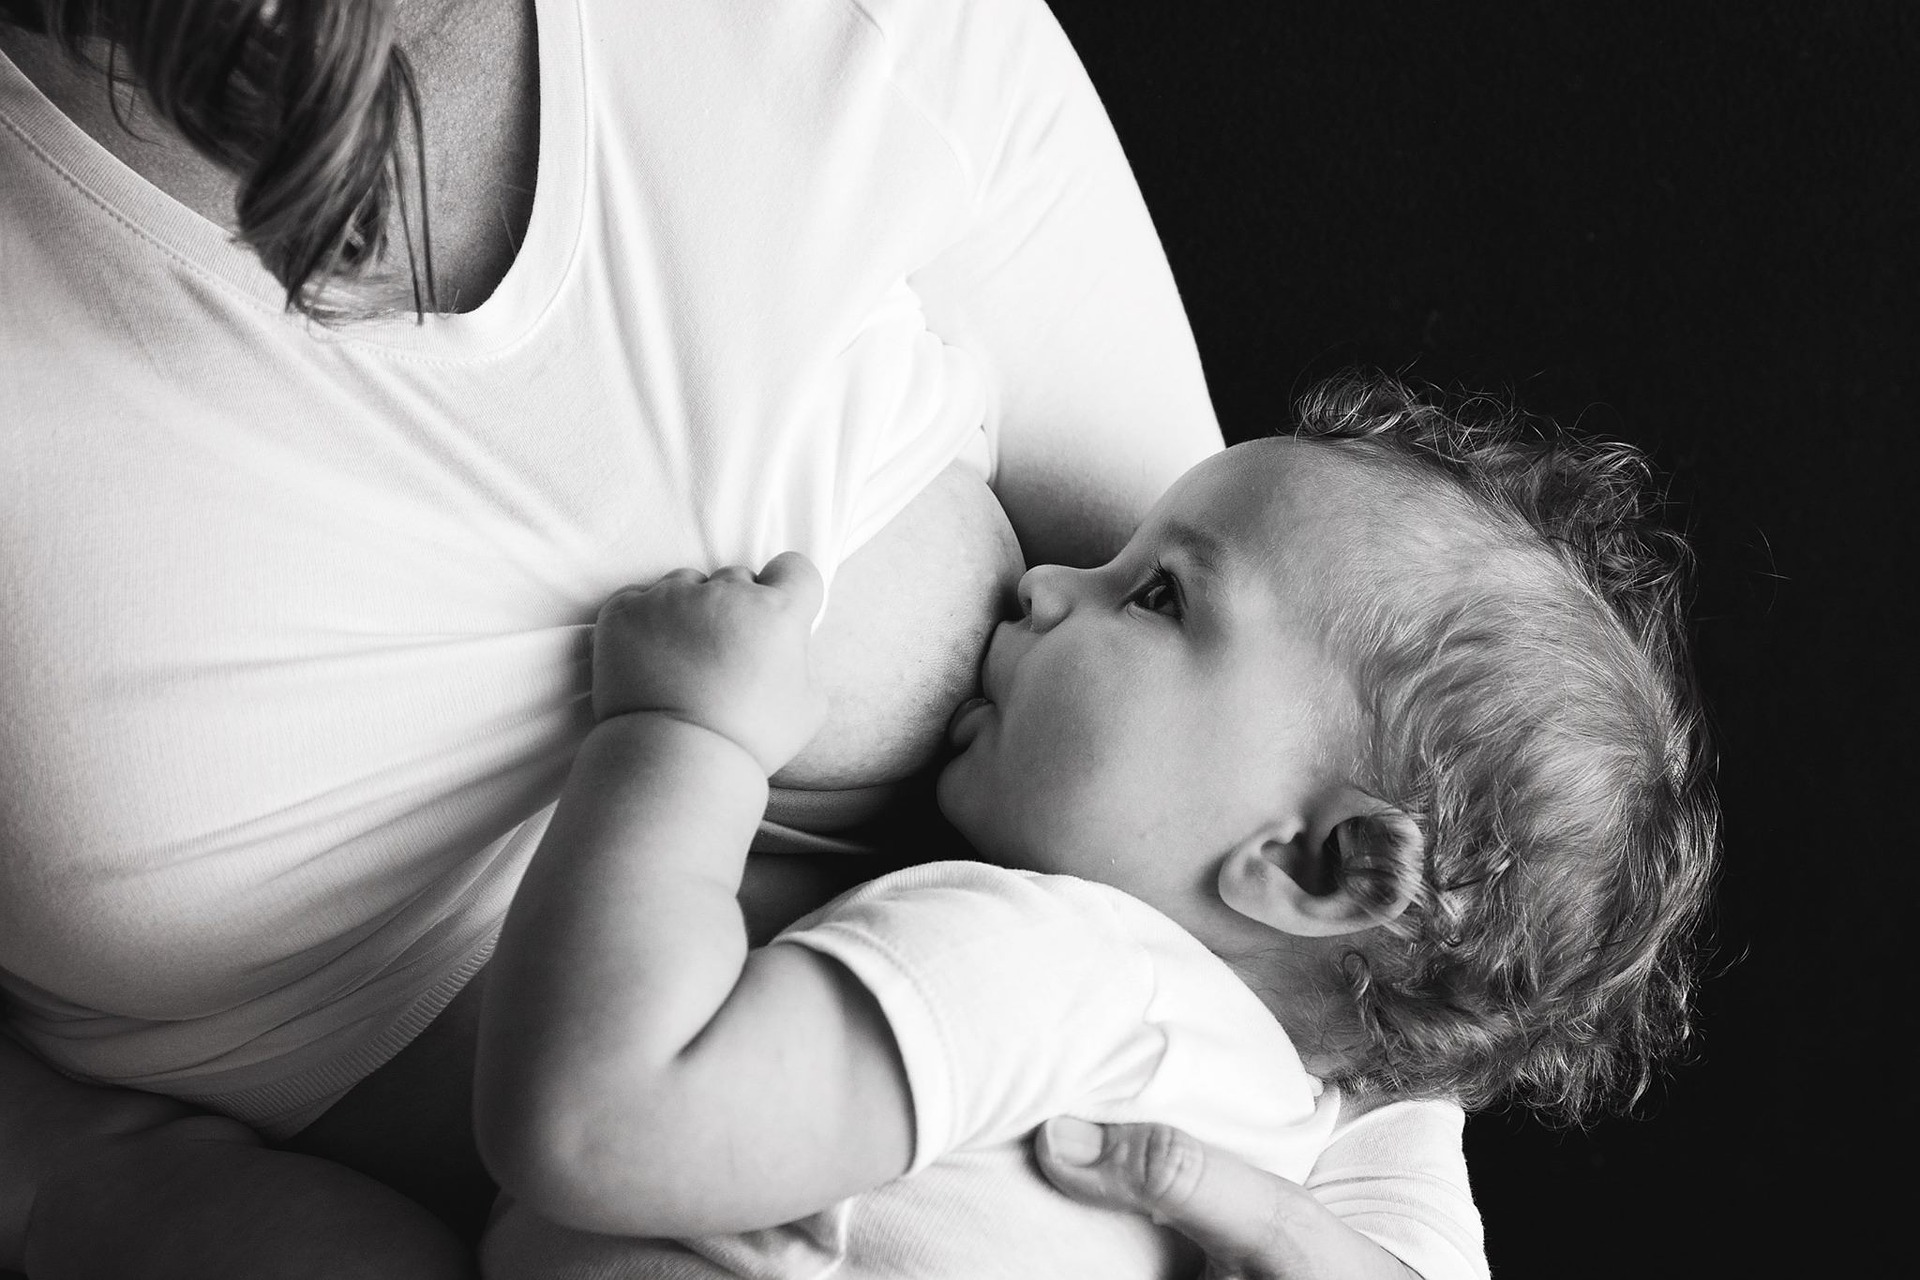 breastfeeding and food : what to eat, what to avoid